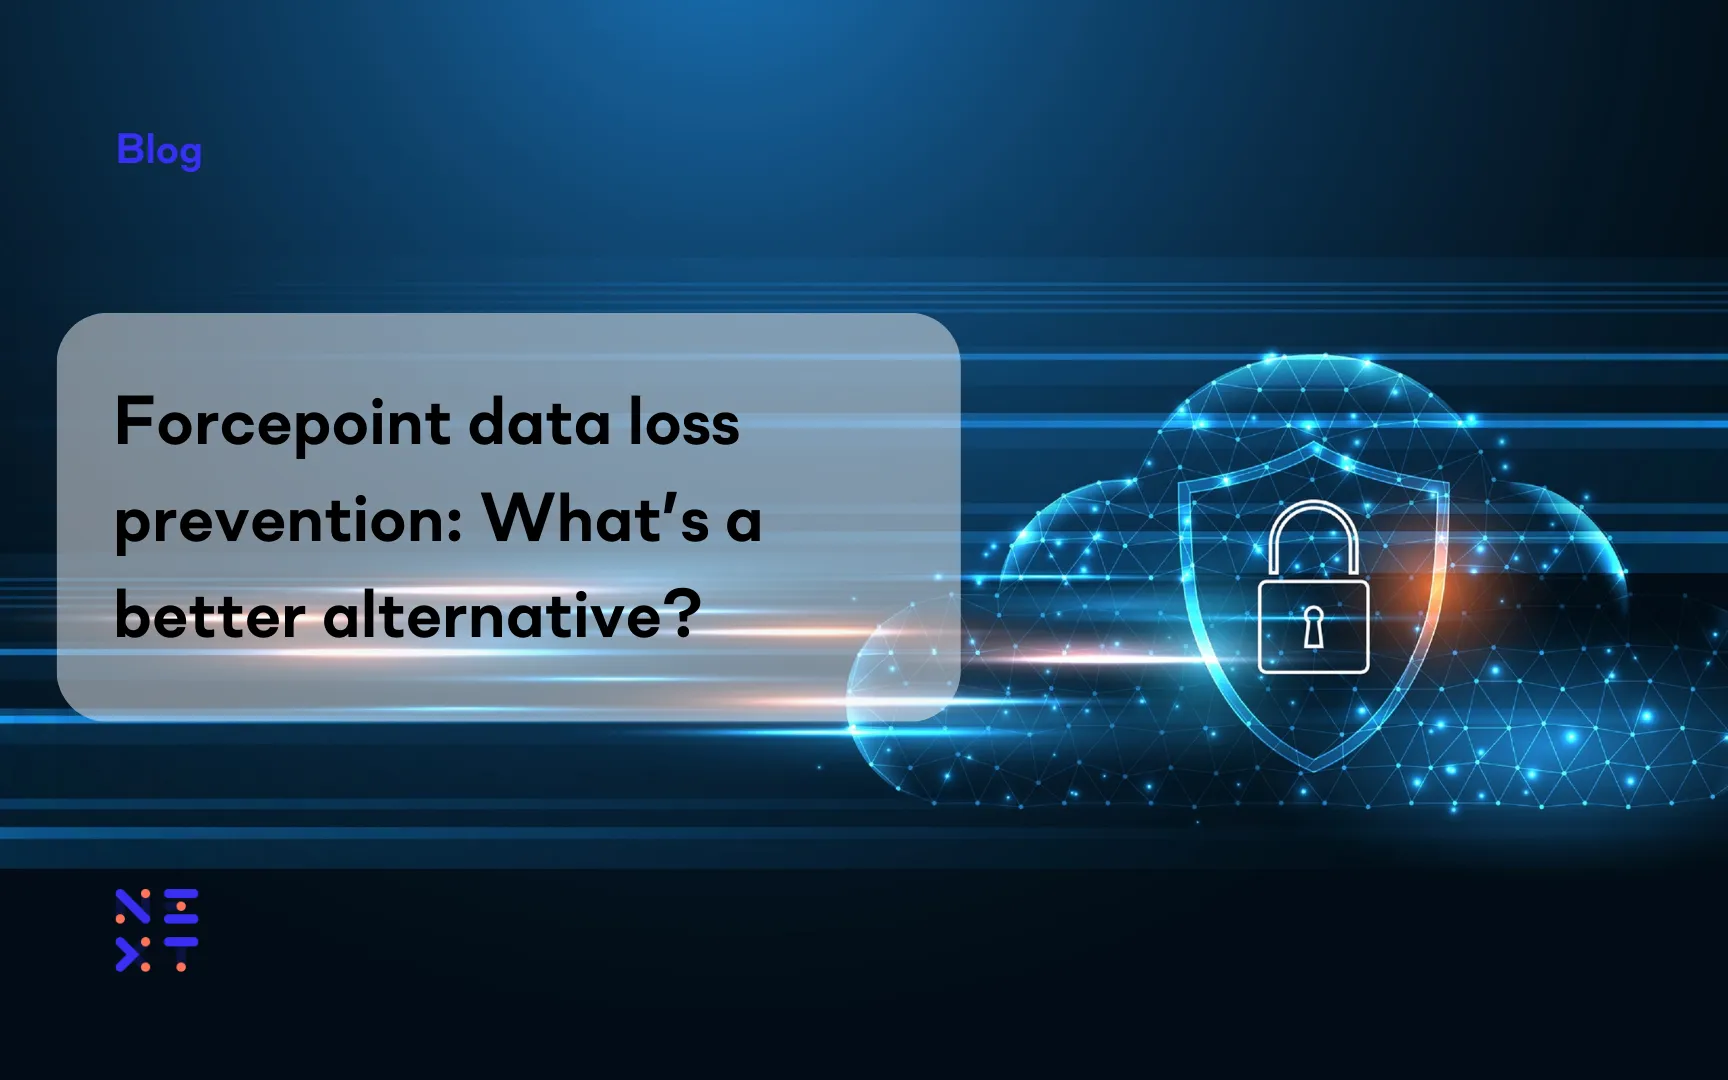 Forcepoint data loss prevention: What’s a better alternative?